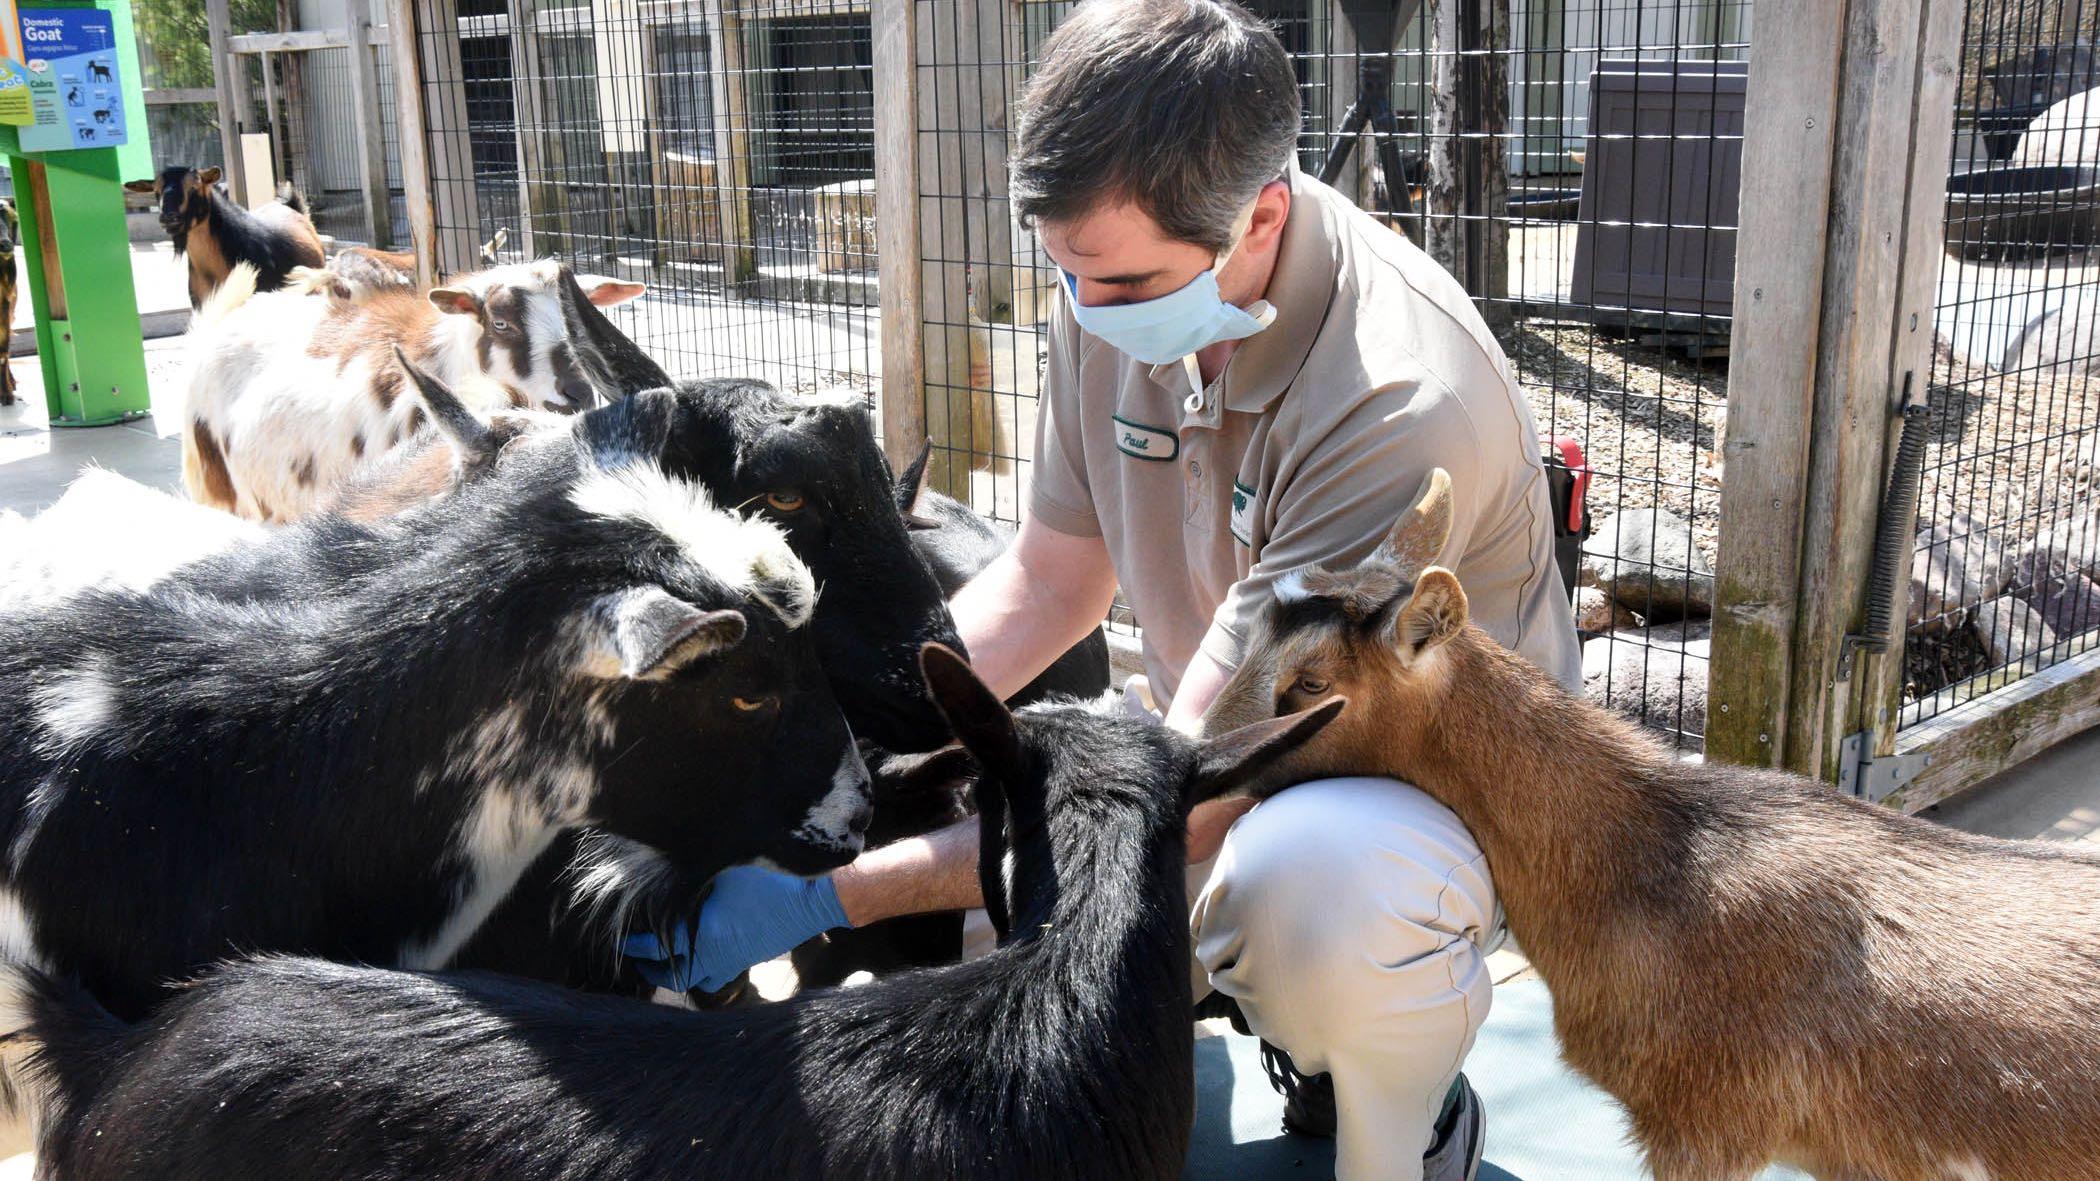 Paul Eberhart, a lead animal care specialist at Brookfield Zoo, spends some time with the Nigerian dwarf goats. (Jim Schulz / Chicago Zoological Society